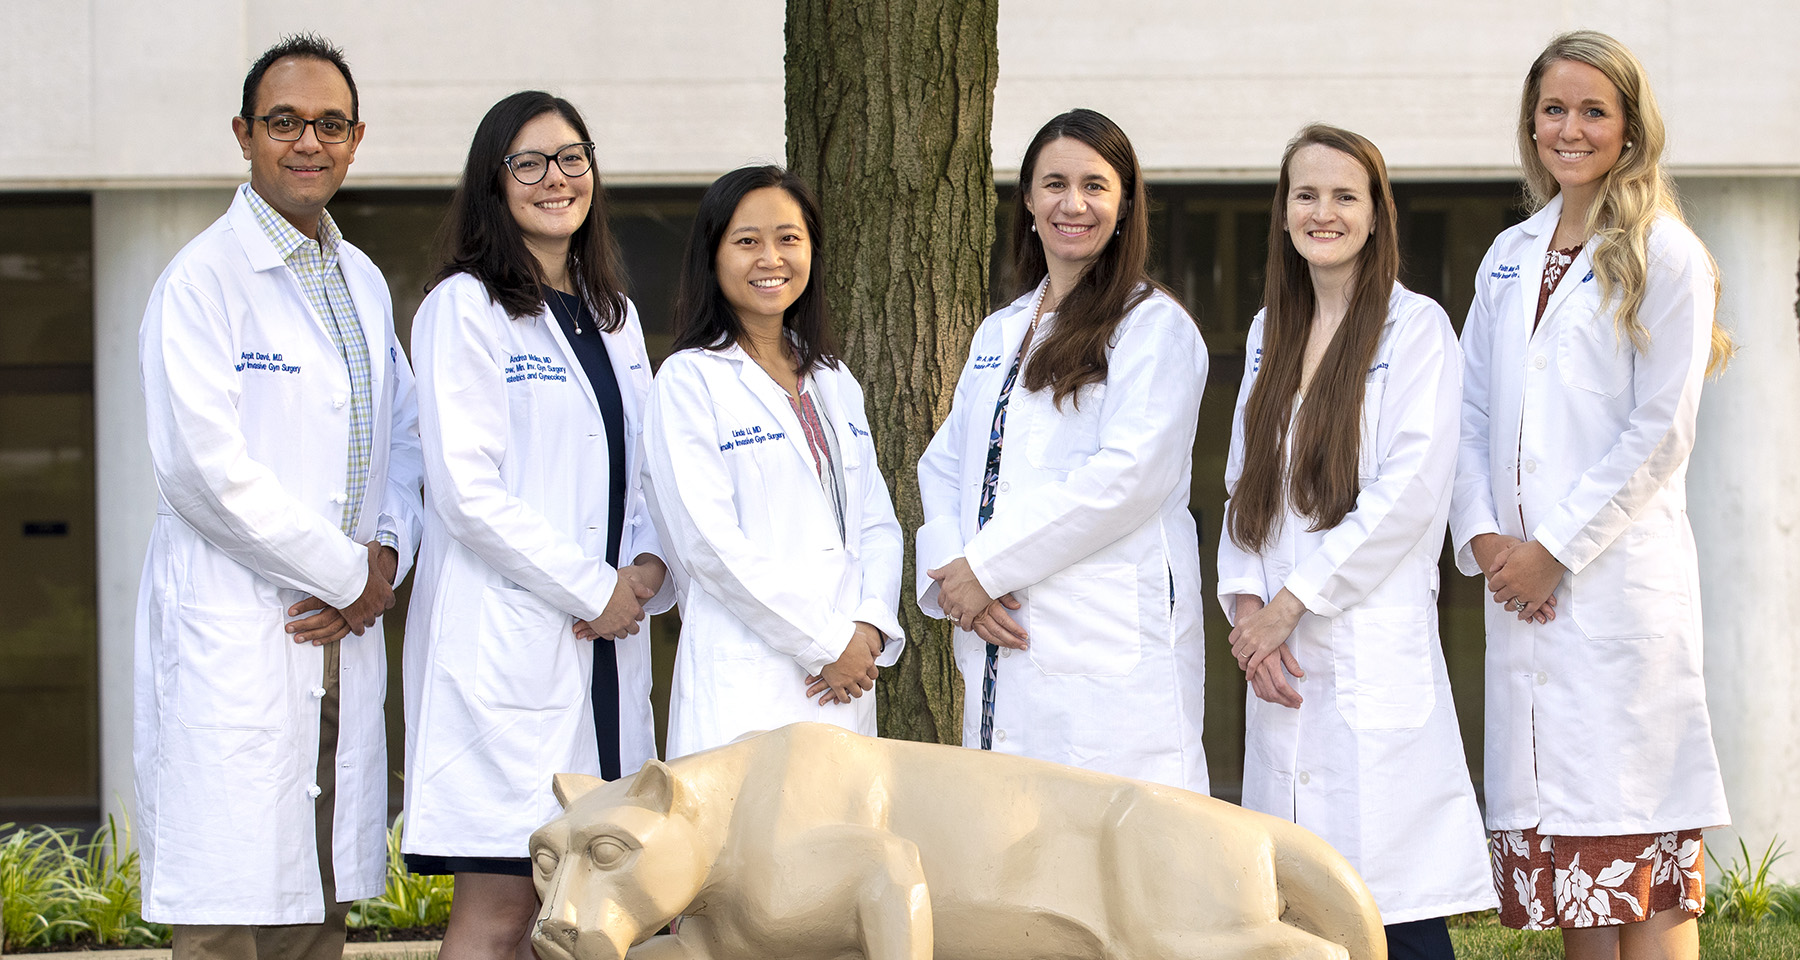 Six faculty members from the Division of Minimally Invasive Gynecological Surgery stand for a photo in a courtyard.